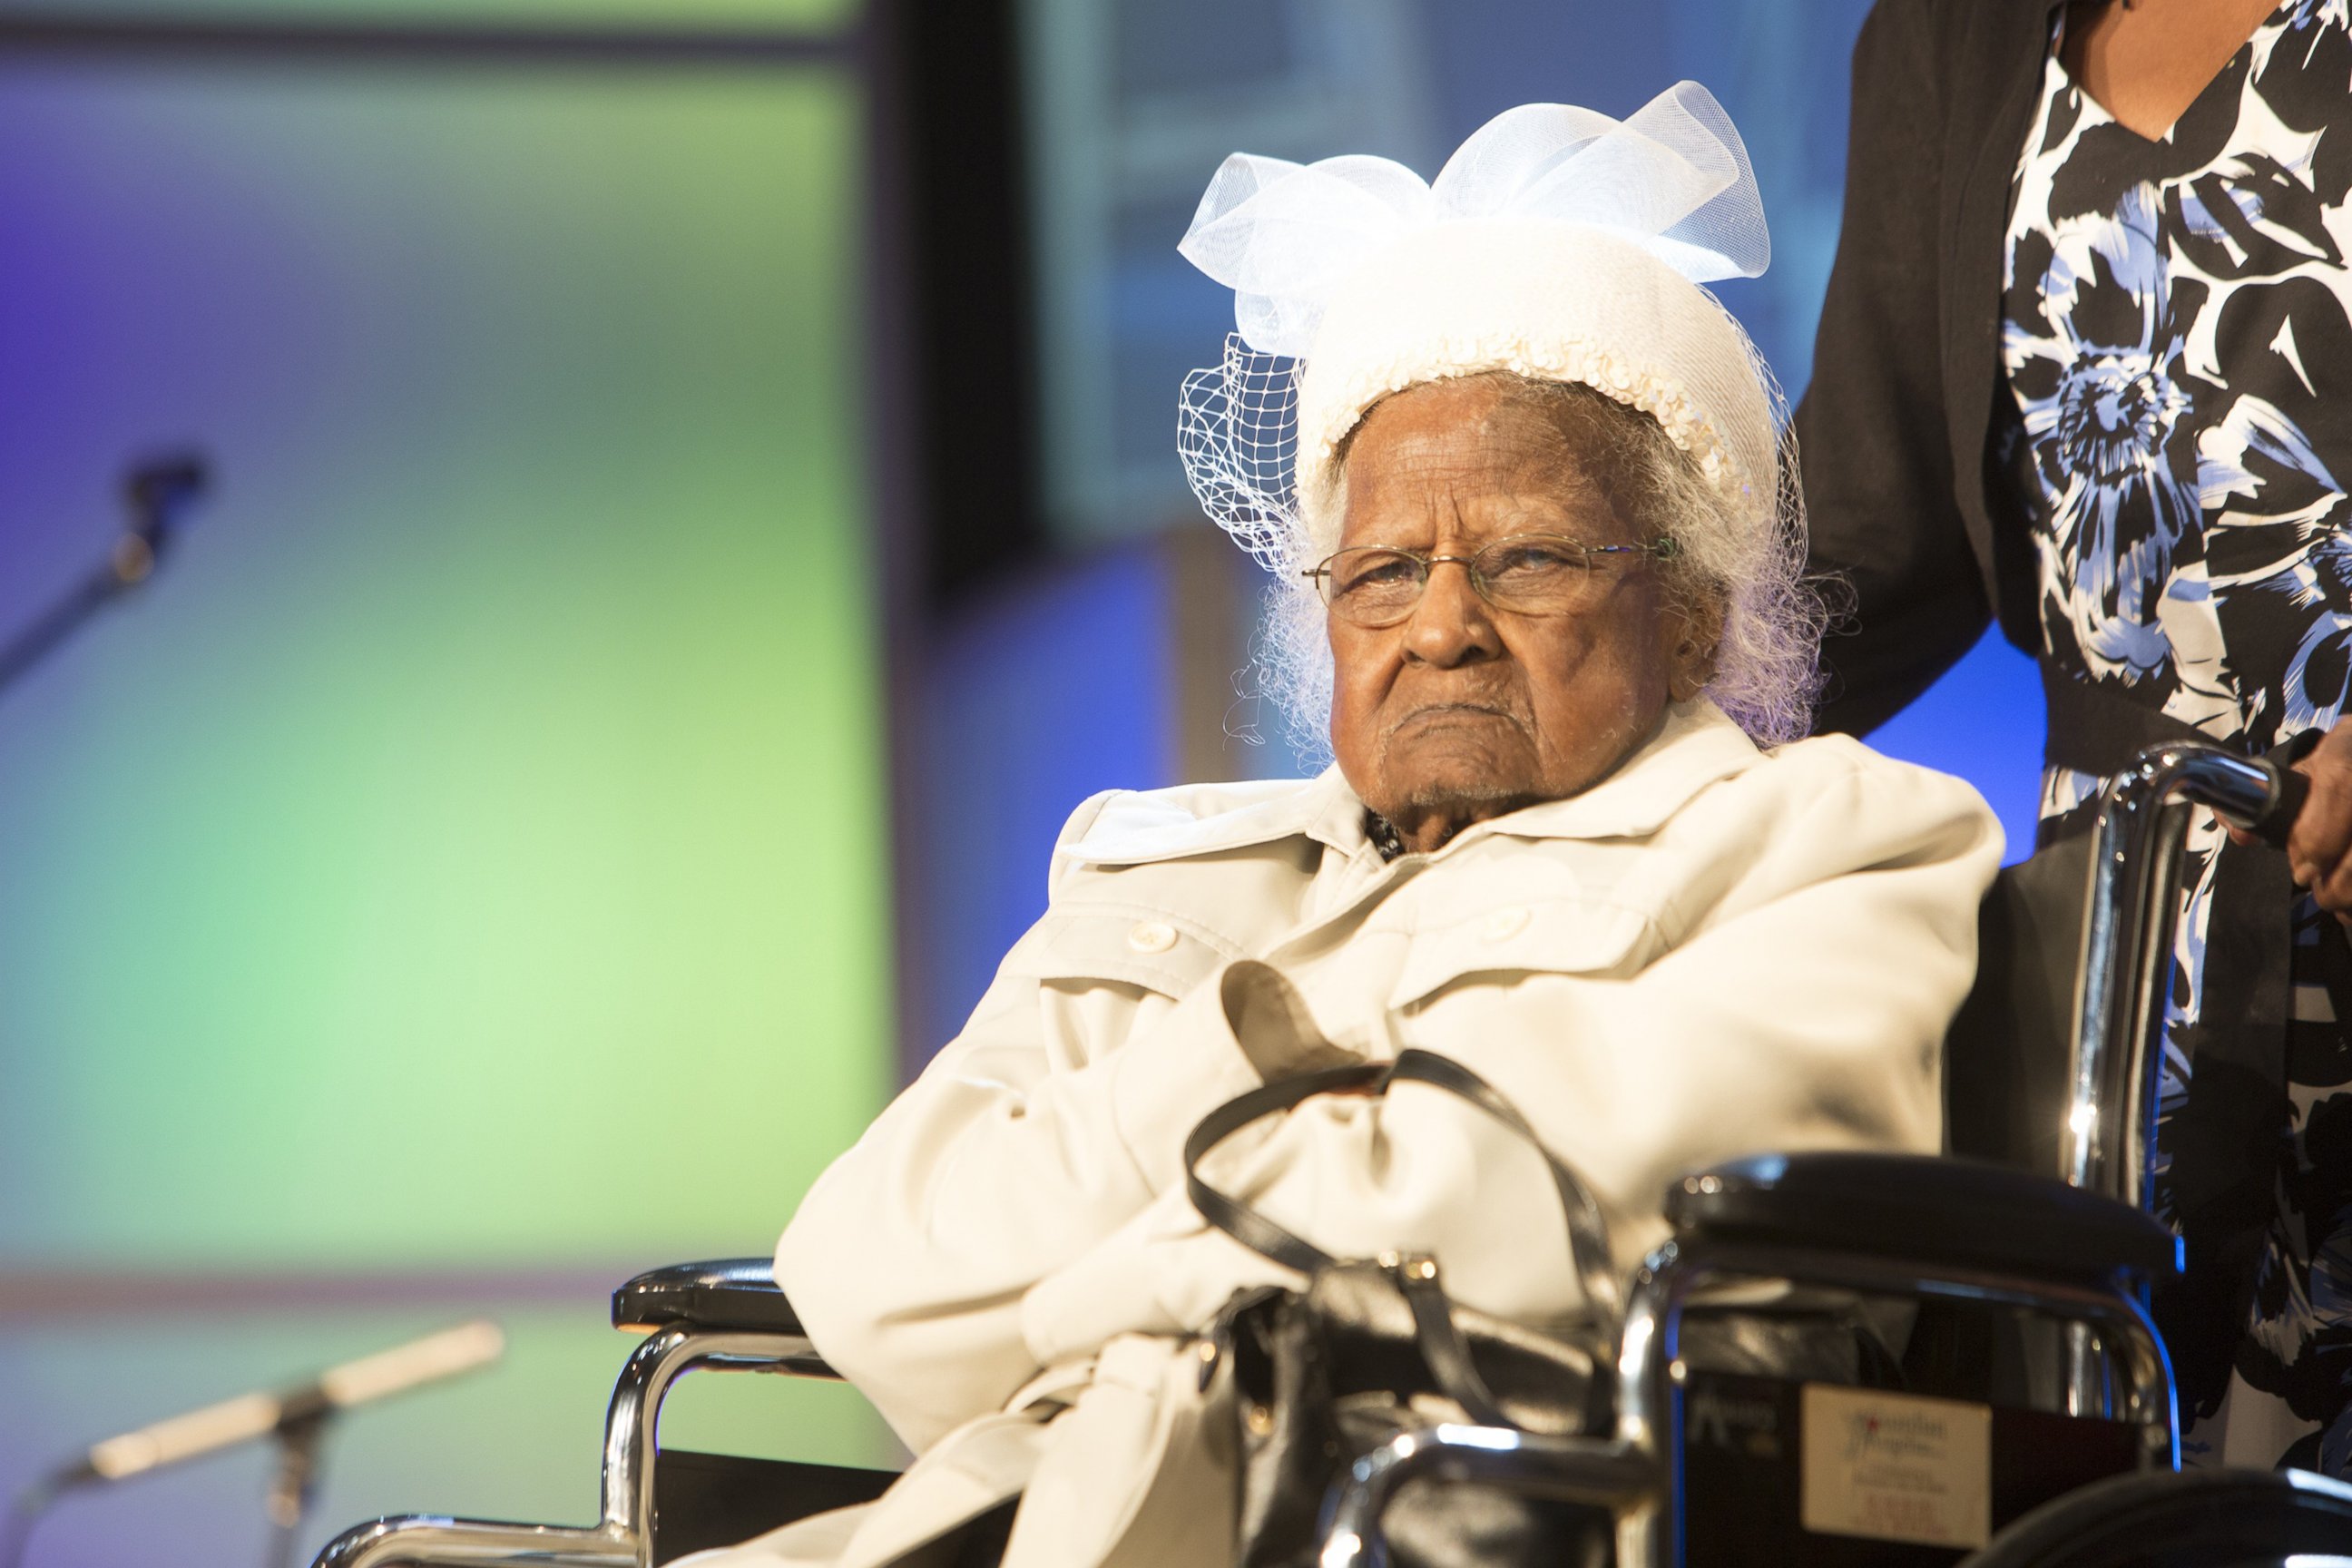 PHOTO: World's oldest person Jeralean Talley attends the 17th Annual Ford Freedom Awards at Max Fischer Music Center on May 5, 2015 in Detroit. 